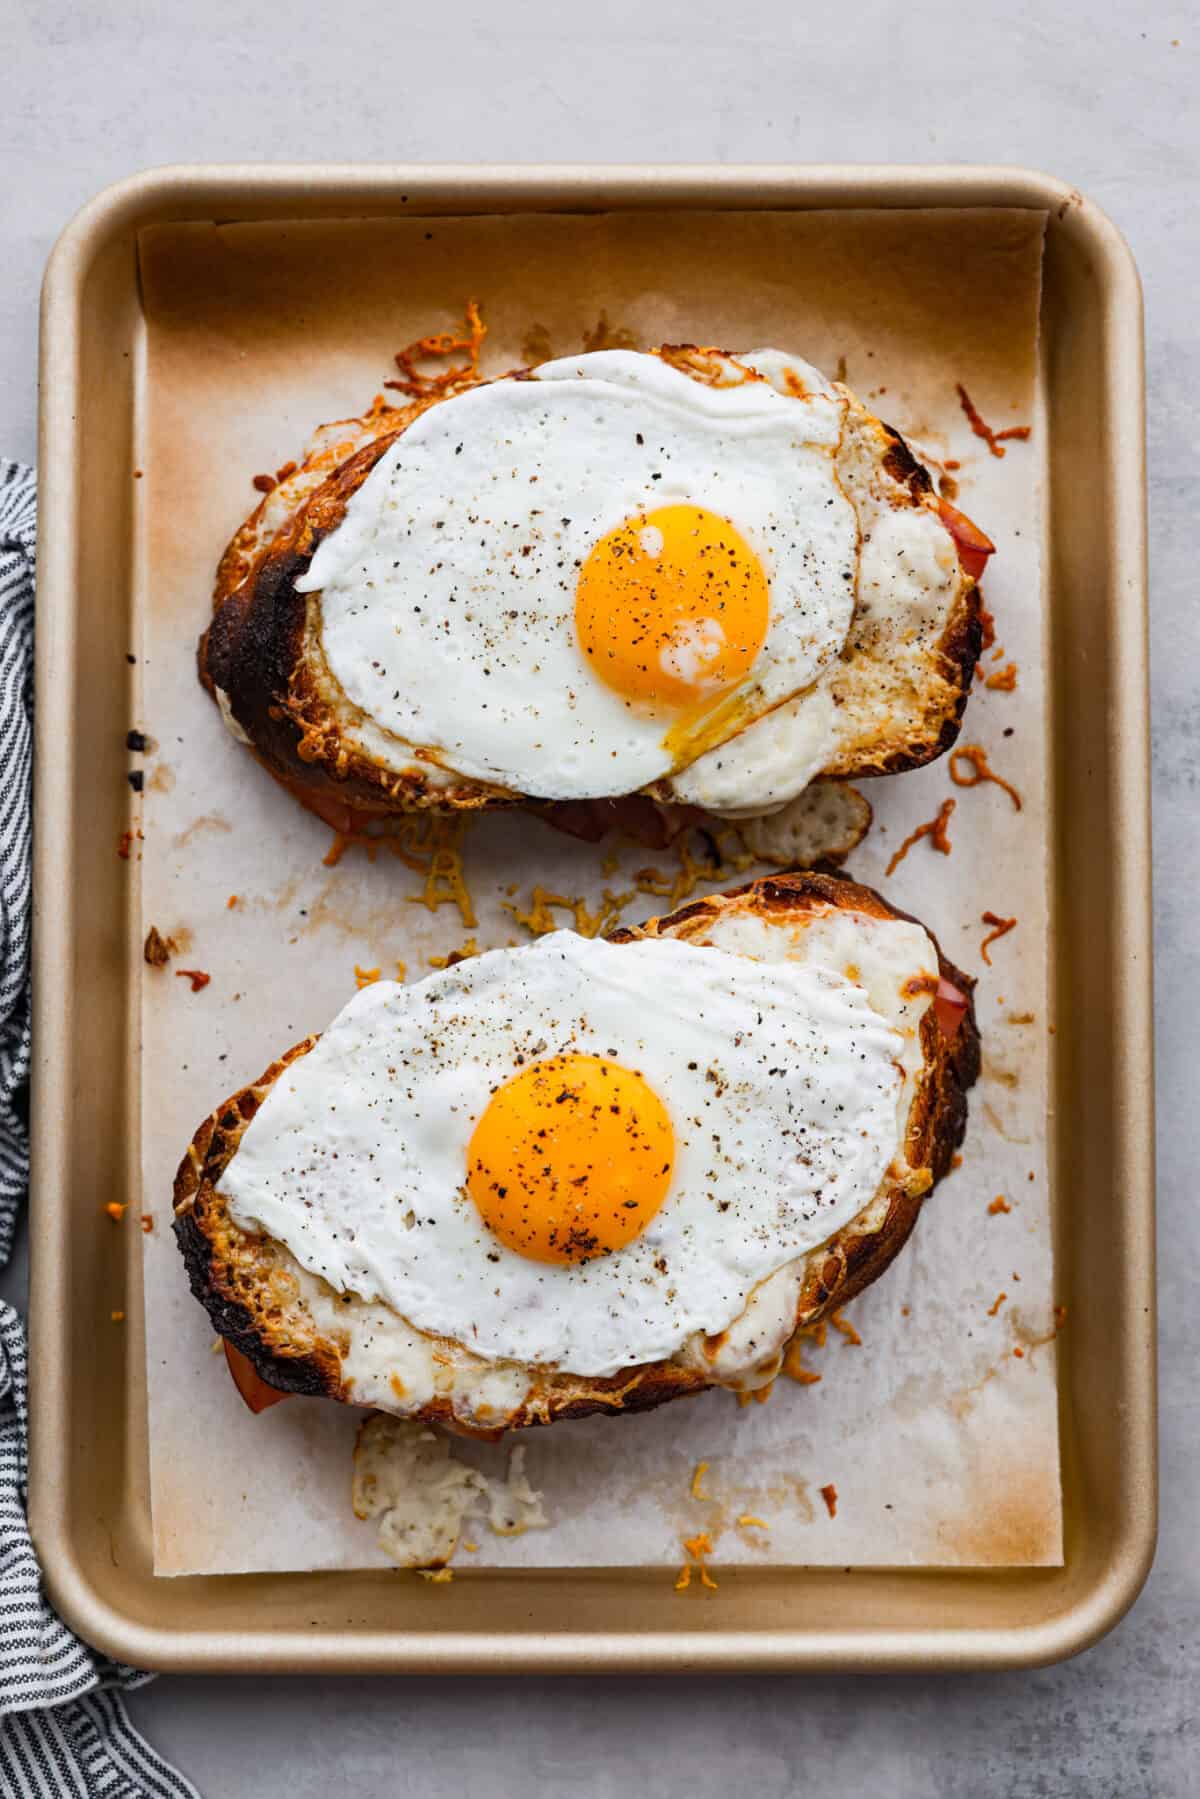 Top-down view of 2 sandwiches topped with fried eggs.